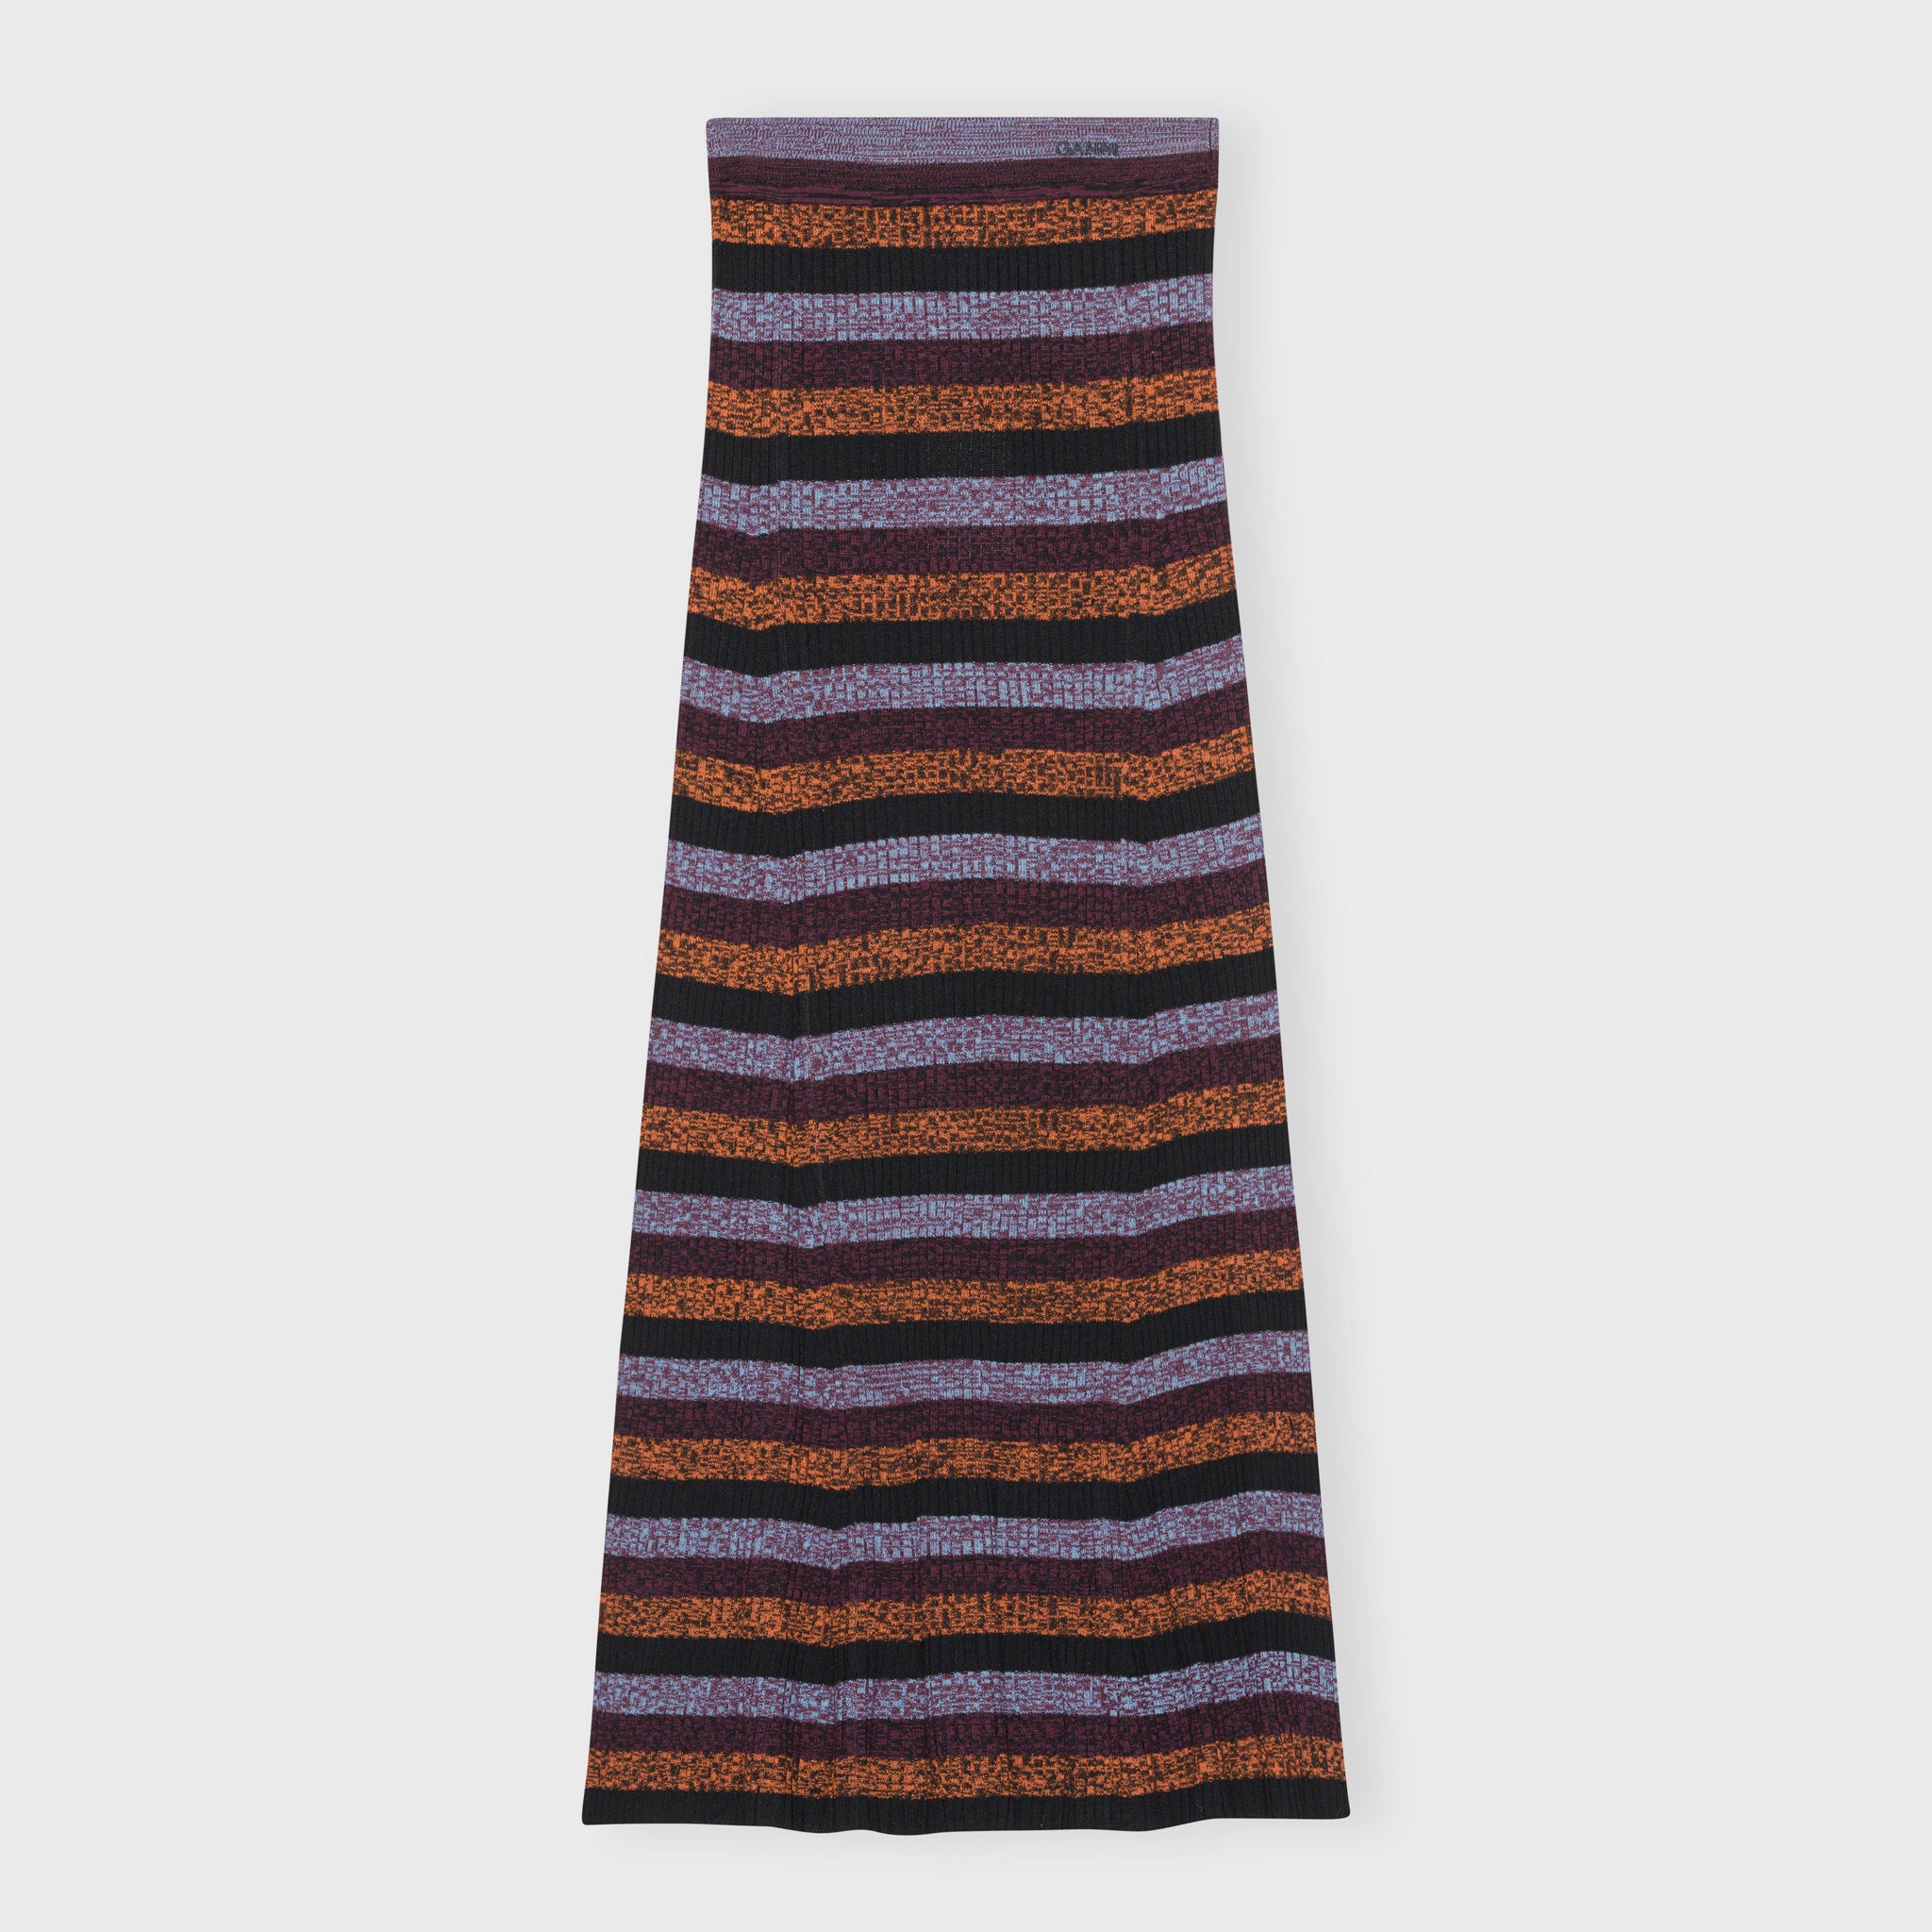 Flat product shot of the black, red, and lavender striped maxi skirt.